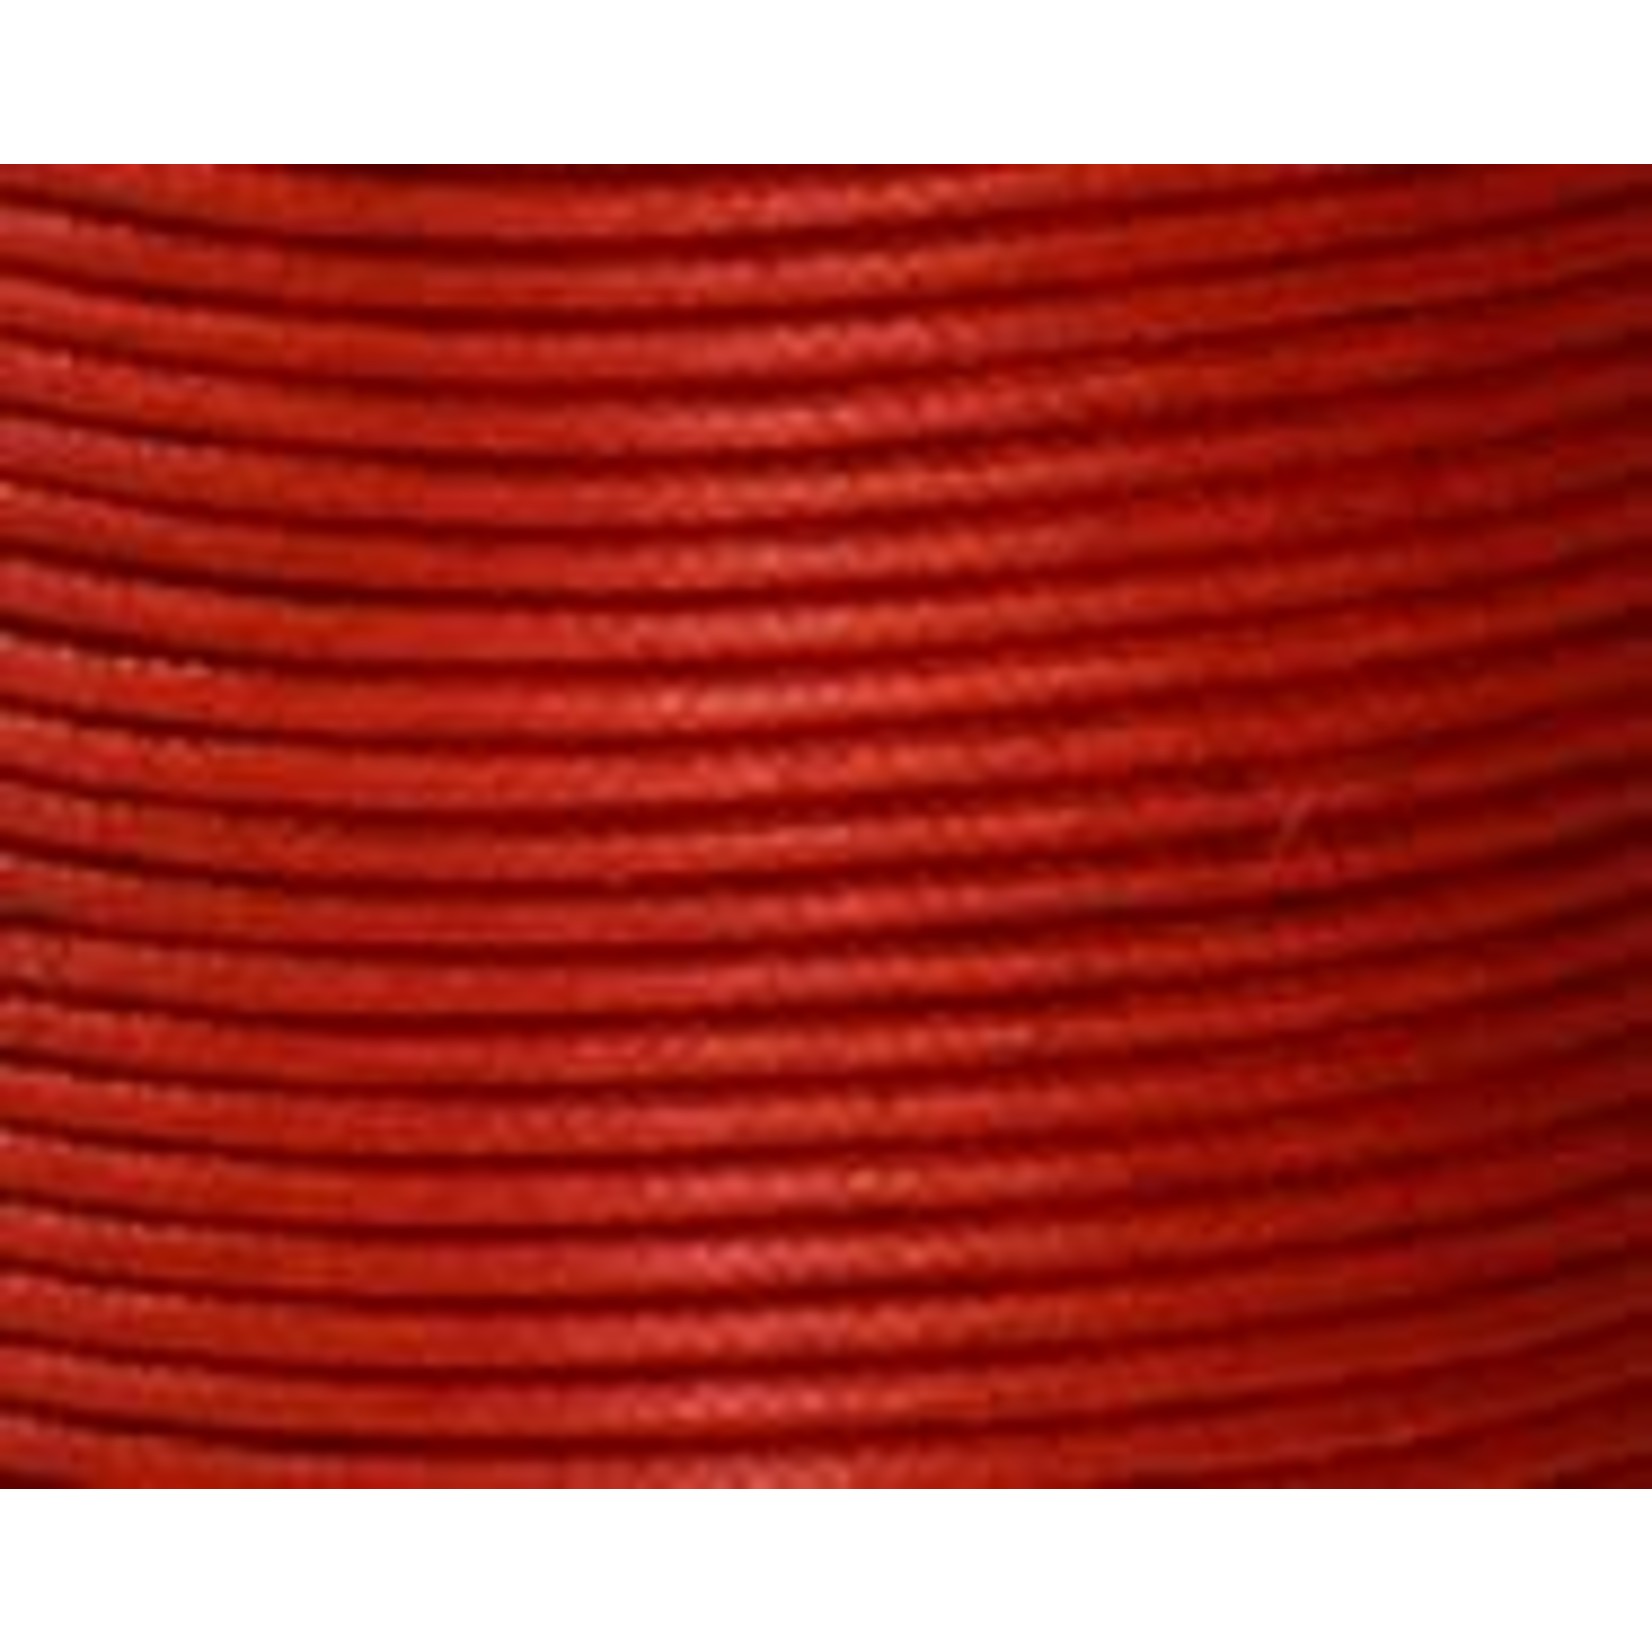 Red Waxed Cotton Cord 2mm - 1 ft